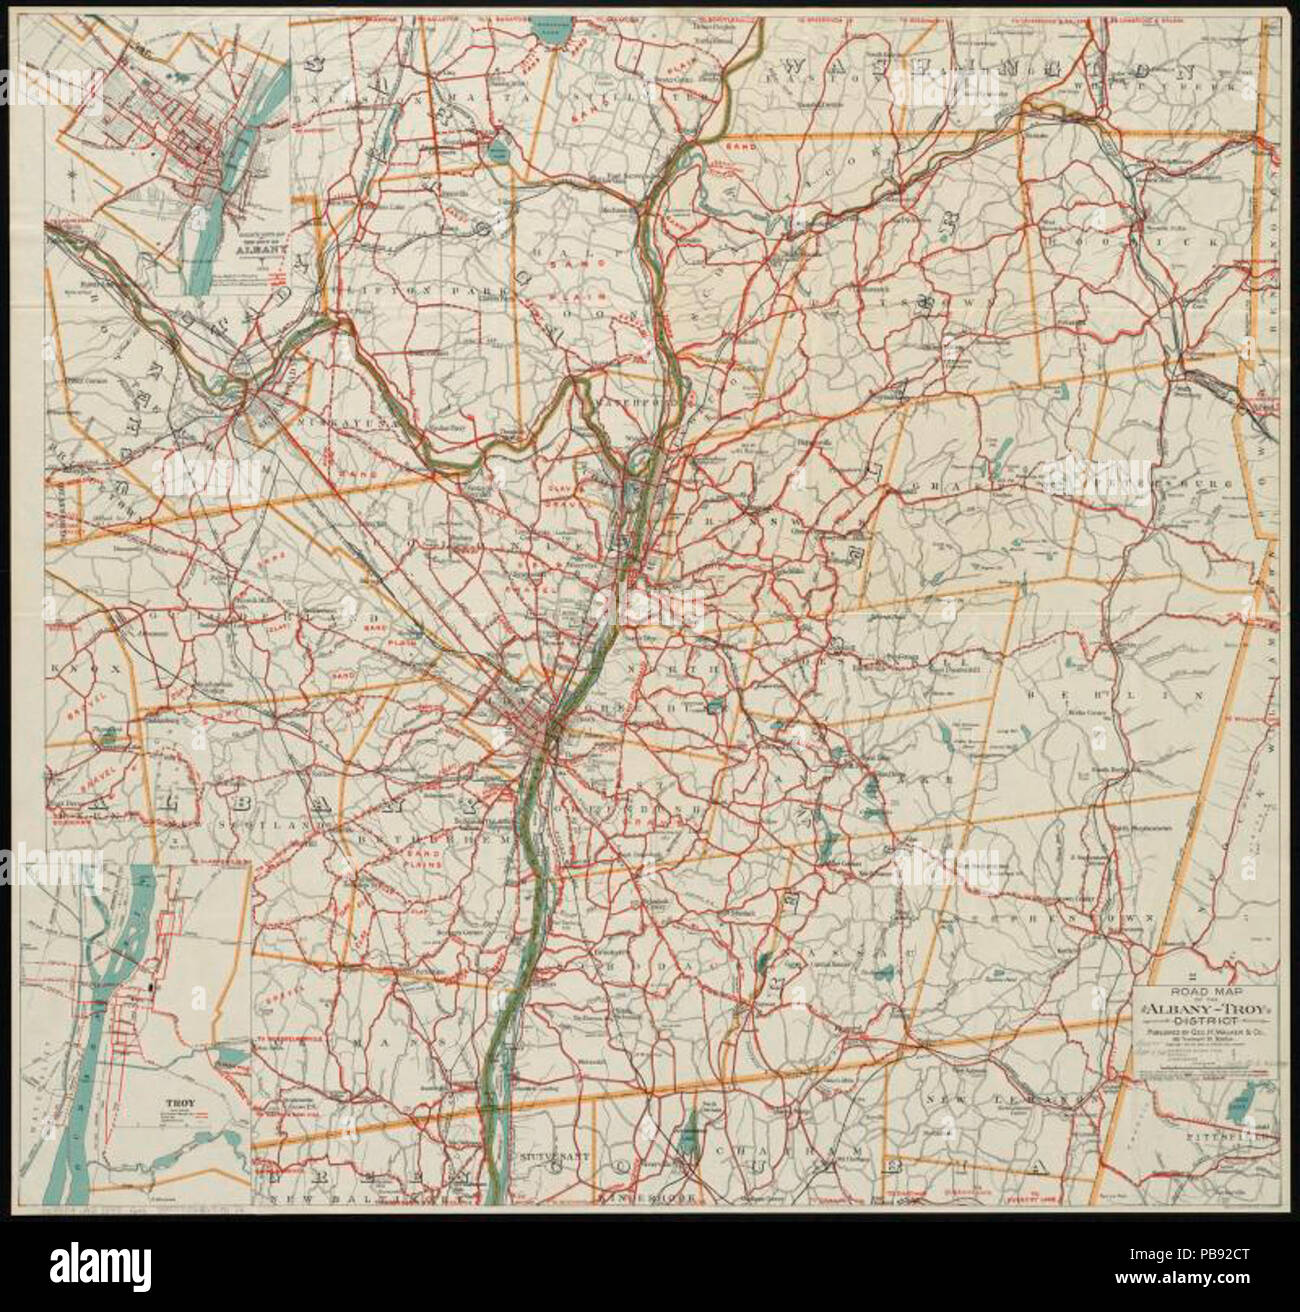 1263 Road map of the Albany-Troy district (10139232154) Stock Photo